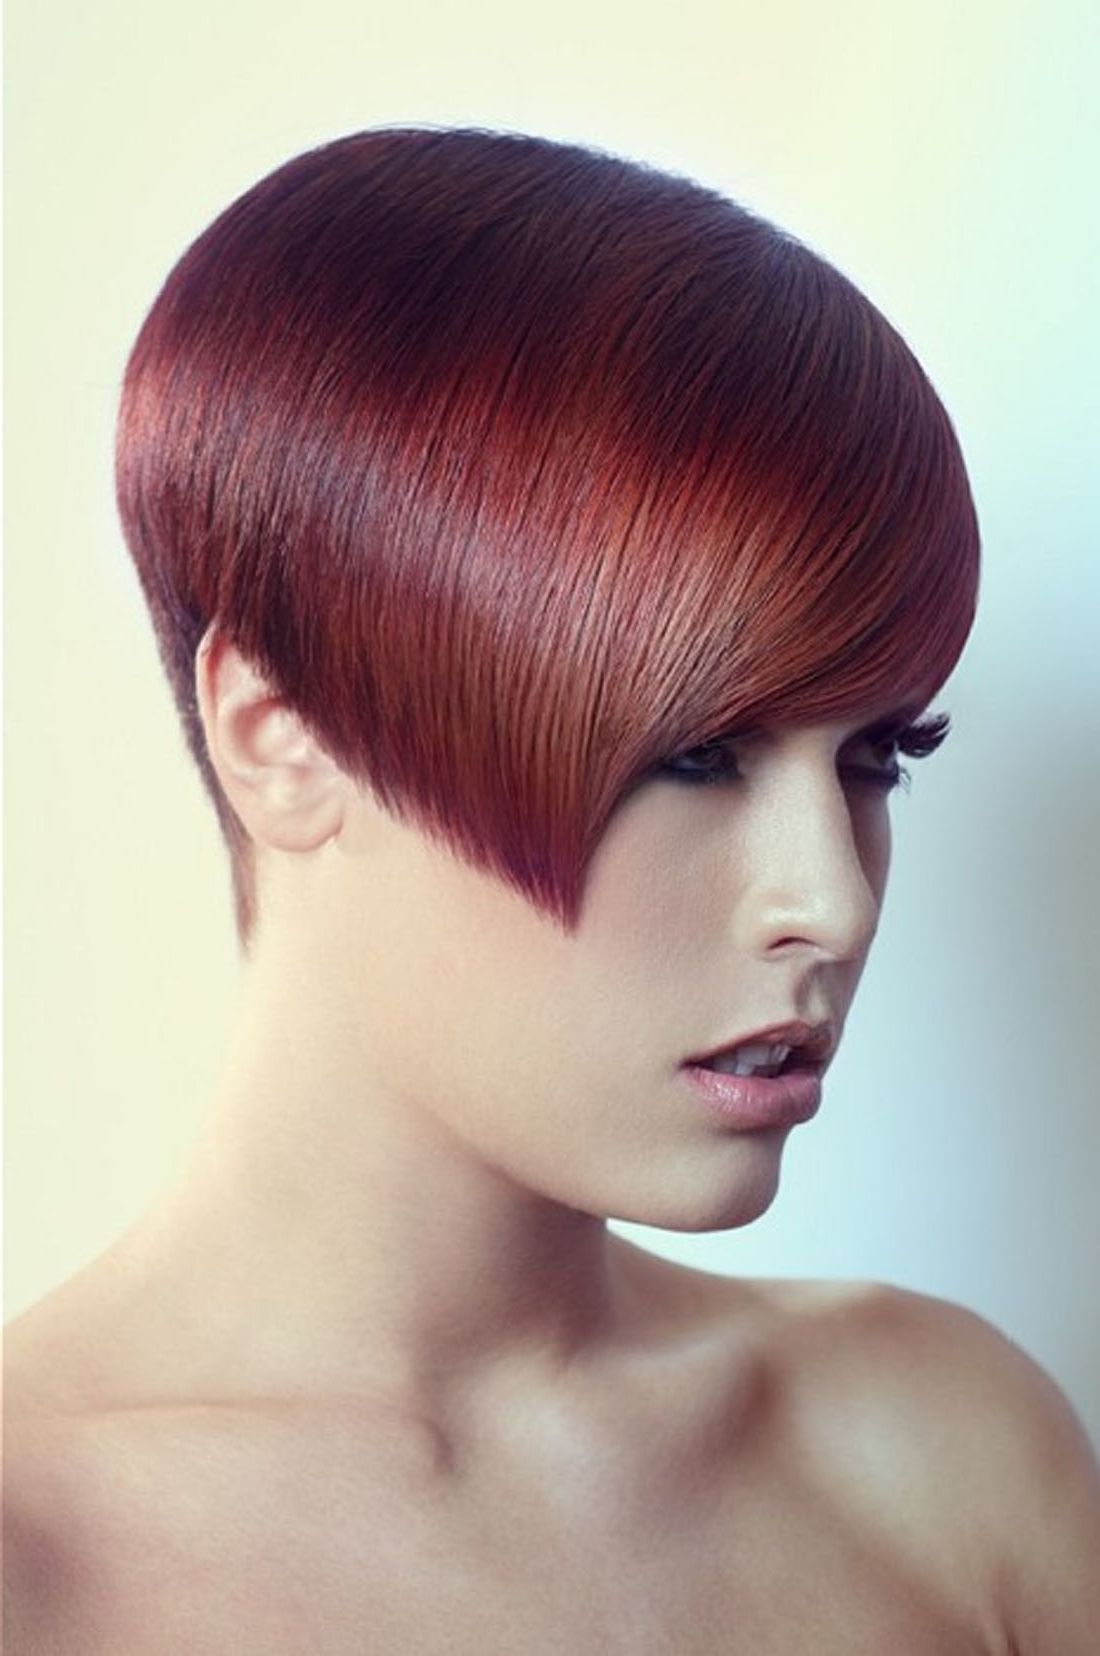 Red And Black Hairstyles For Short Hair – Hairstyle For Women & Man Intended For Red And Black Short Hairstyles (View 5 of 25)